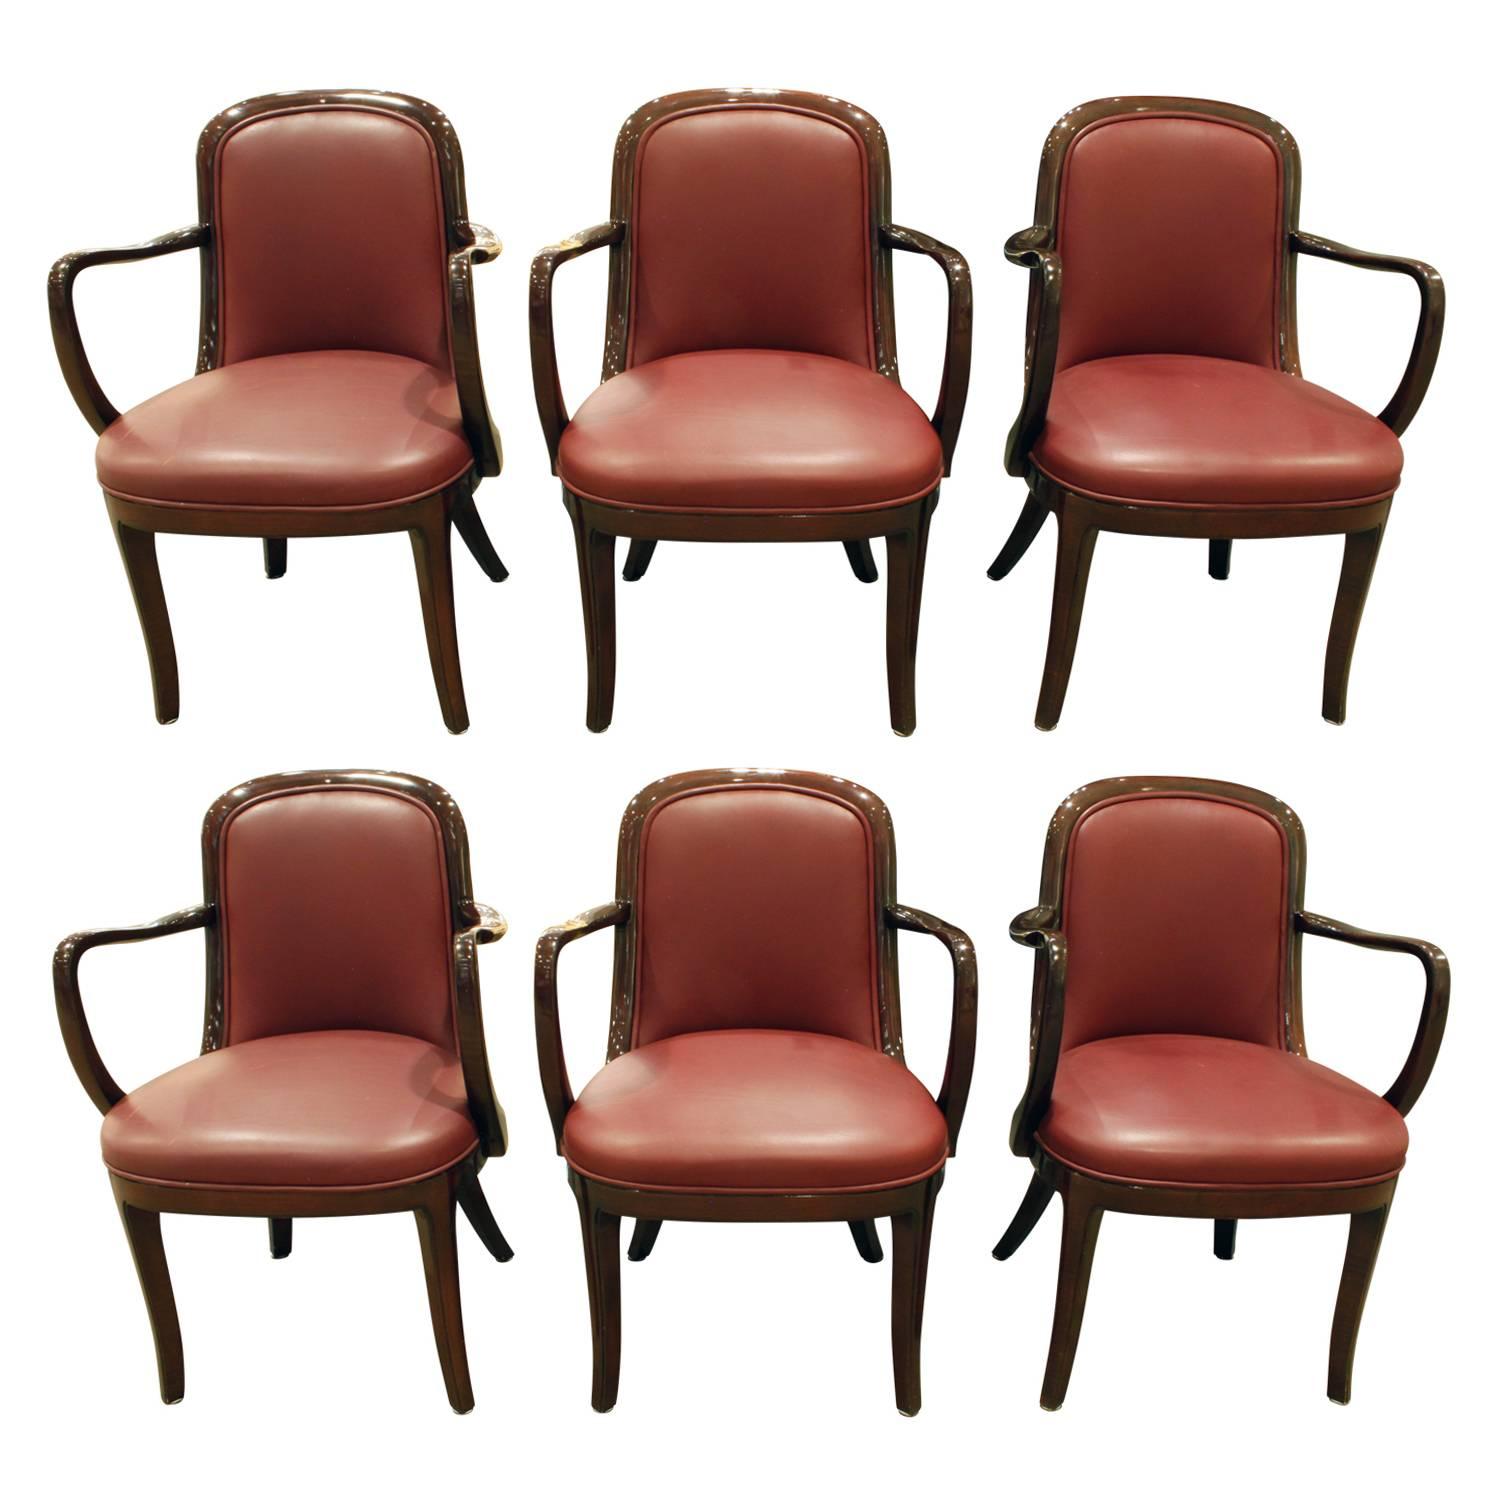 Donghia Set of Six "Coronia Dining Chairs" in Lacquer Mahogany Frames, 1980s